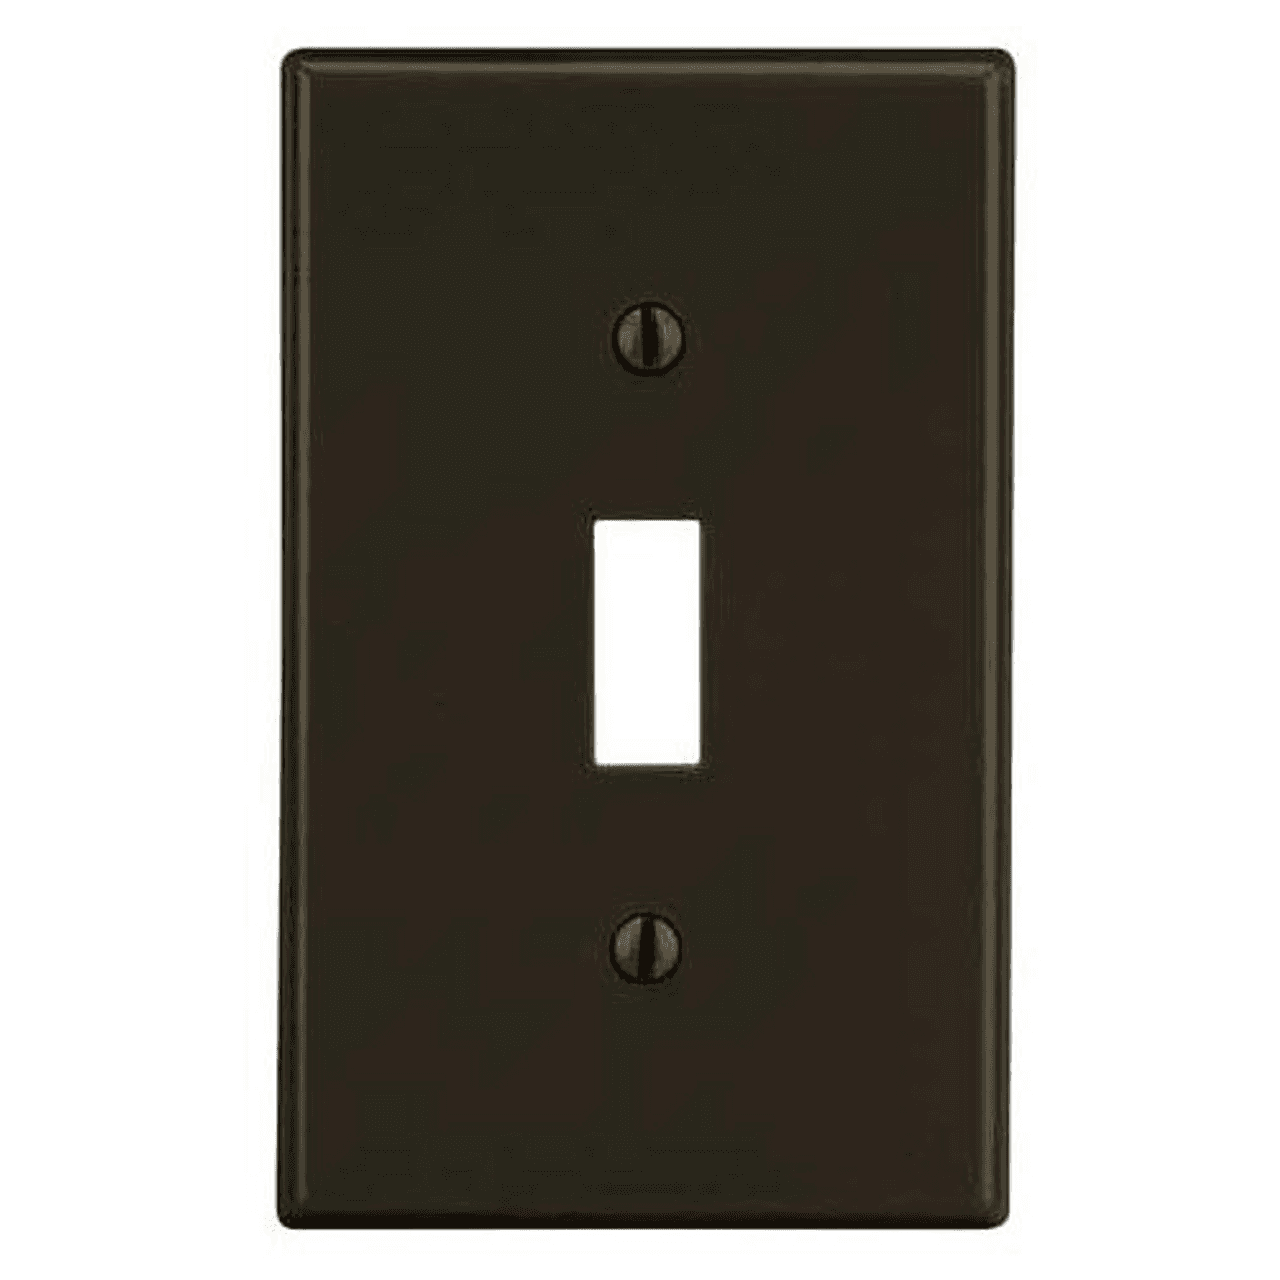 Hubbell P1 Wallplate, Toggle, 1-Gang, Brown  ; High-impact, self-extinguishing polycarbonate material ; More Rigid ; Sharp lines and less dimpling ; Smooth satin finish ; Blends into wall with an optimum finish ; Captive screw feature on single-gang versions, hold s